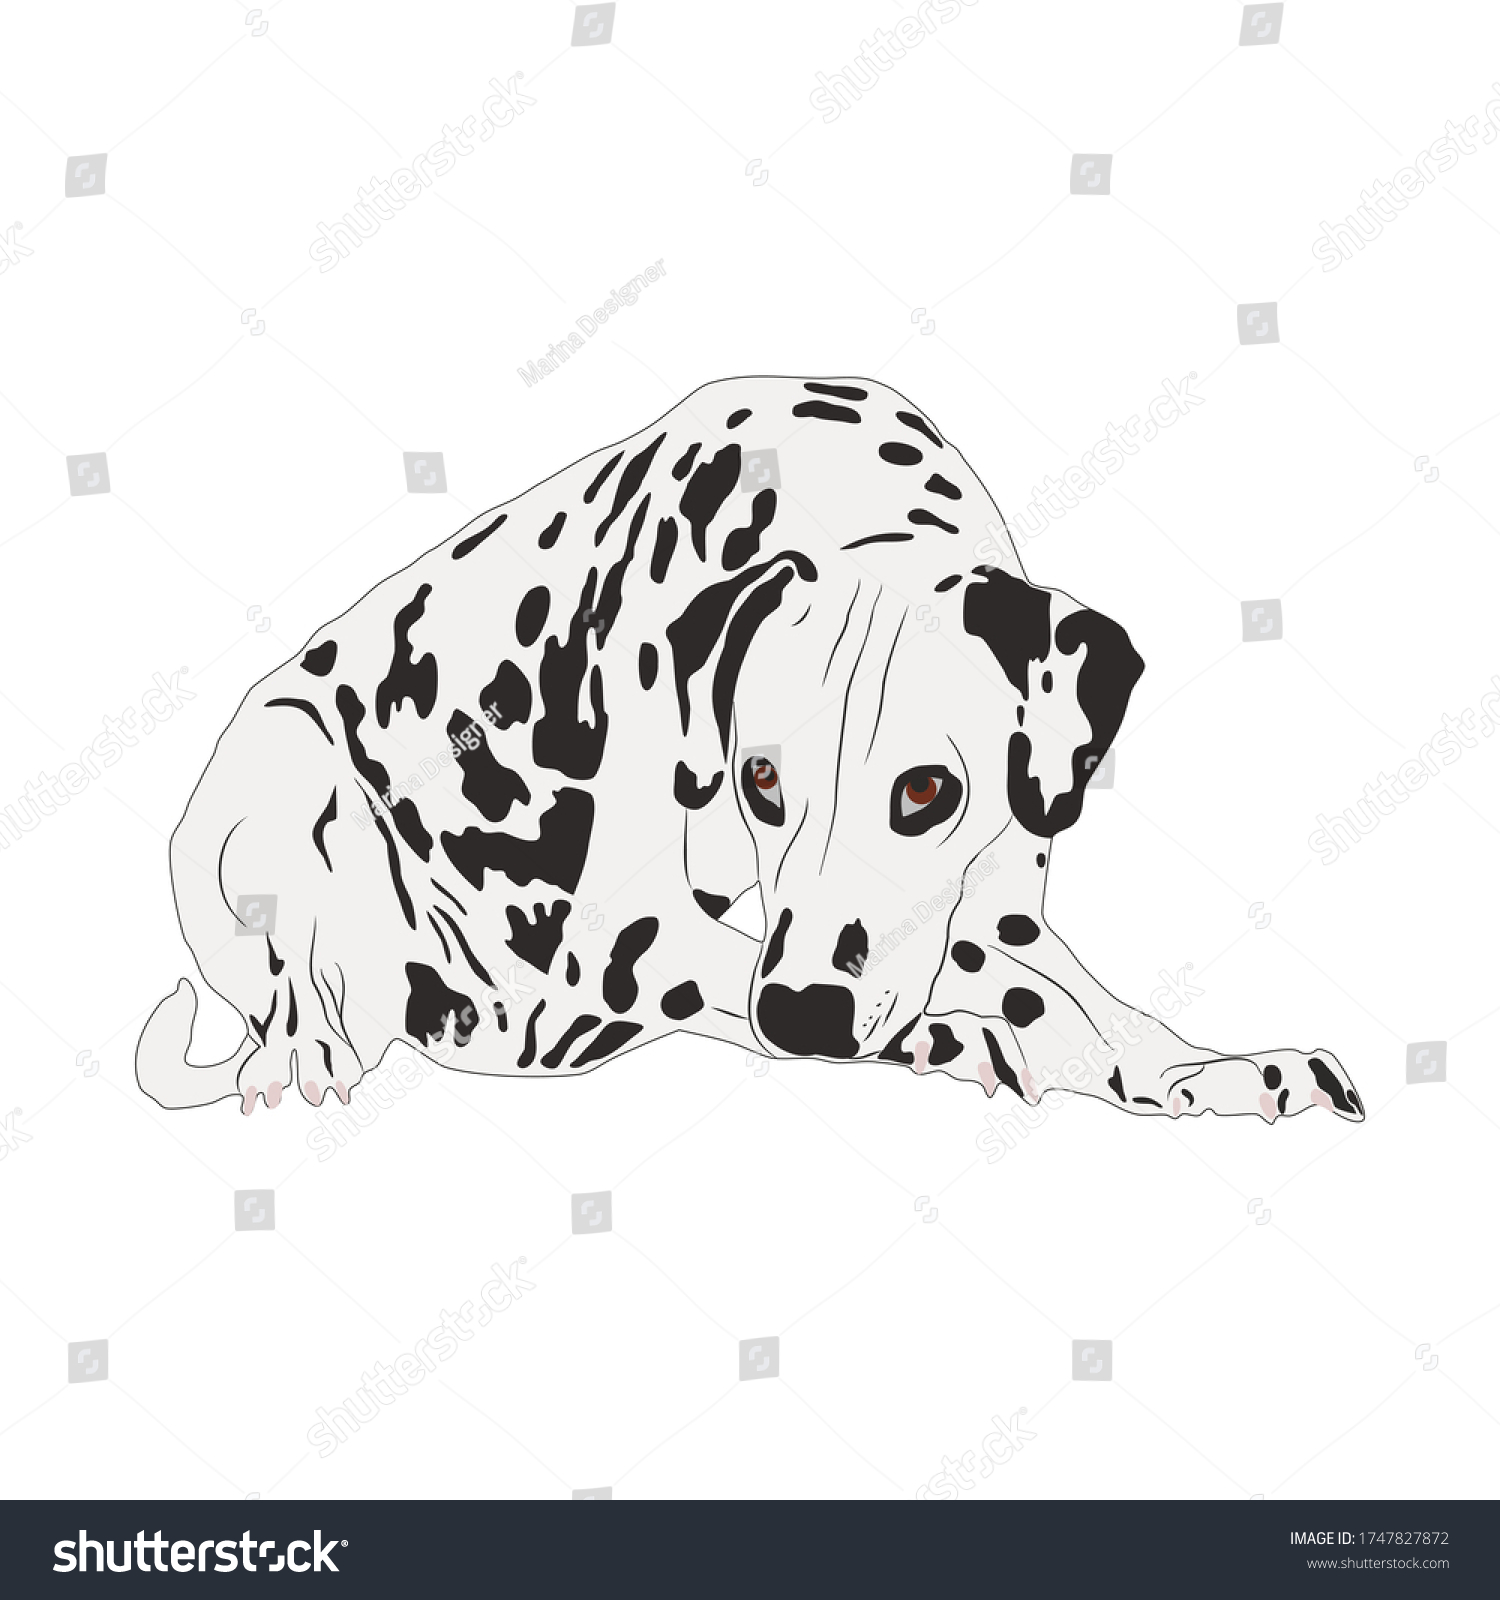 SVG of Dalmatian dog isolated on white background. Vector illustration in flat style. Sad cute dalmatian with beautiful spots, dog loyalty. For use in thematic projects, print, web and apps.
 svg